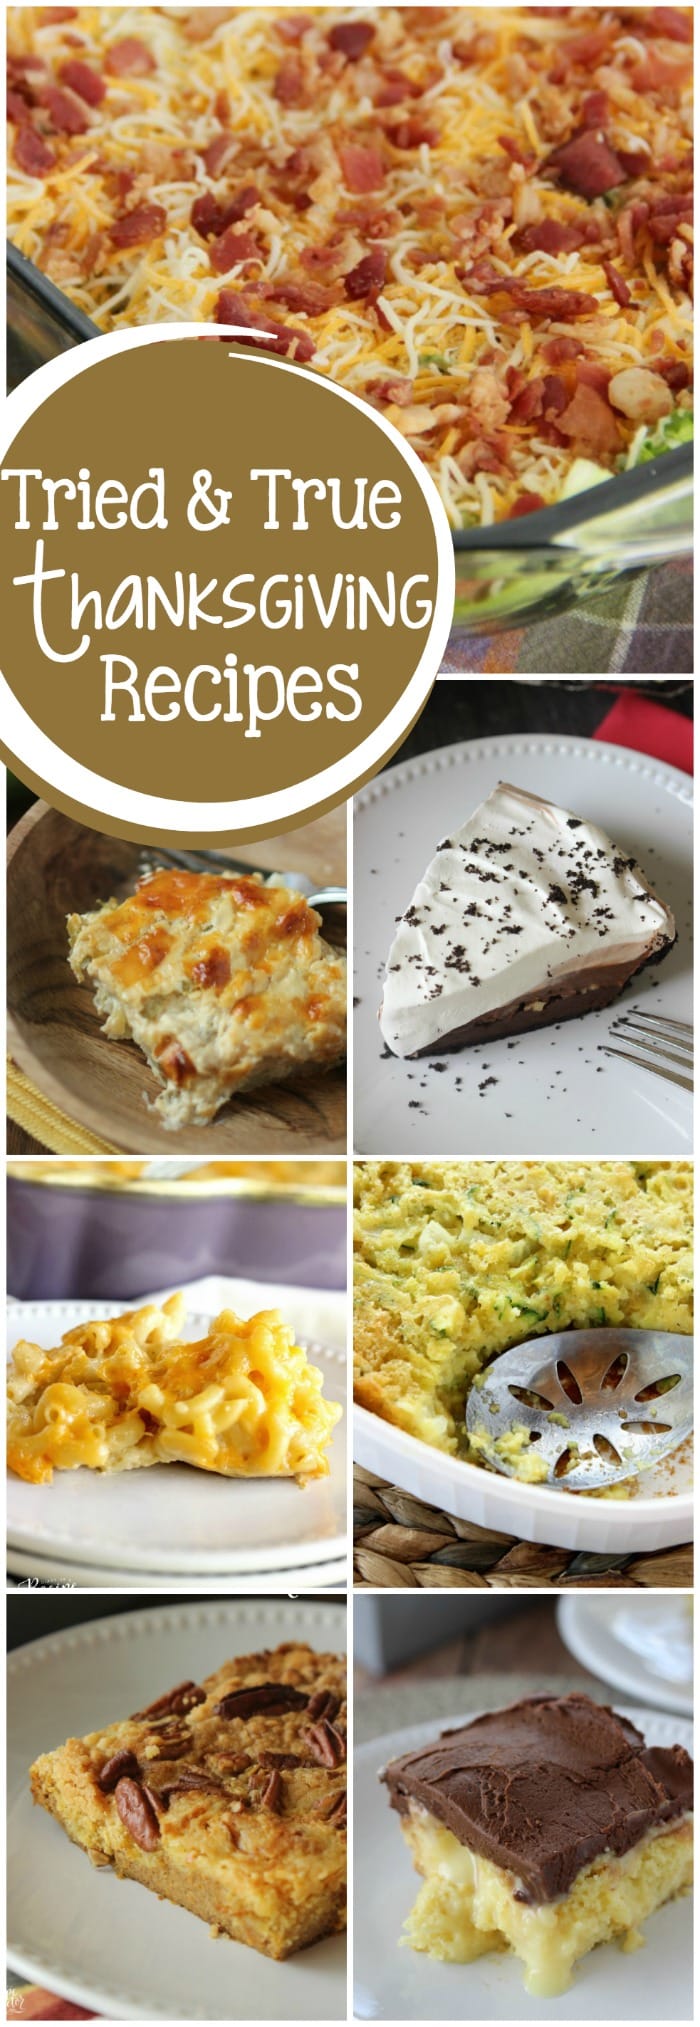 Tried & True Thanksgiving Favorites- 10 of our favorite recipes perfect for holiday gatherings!